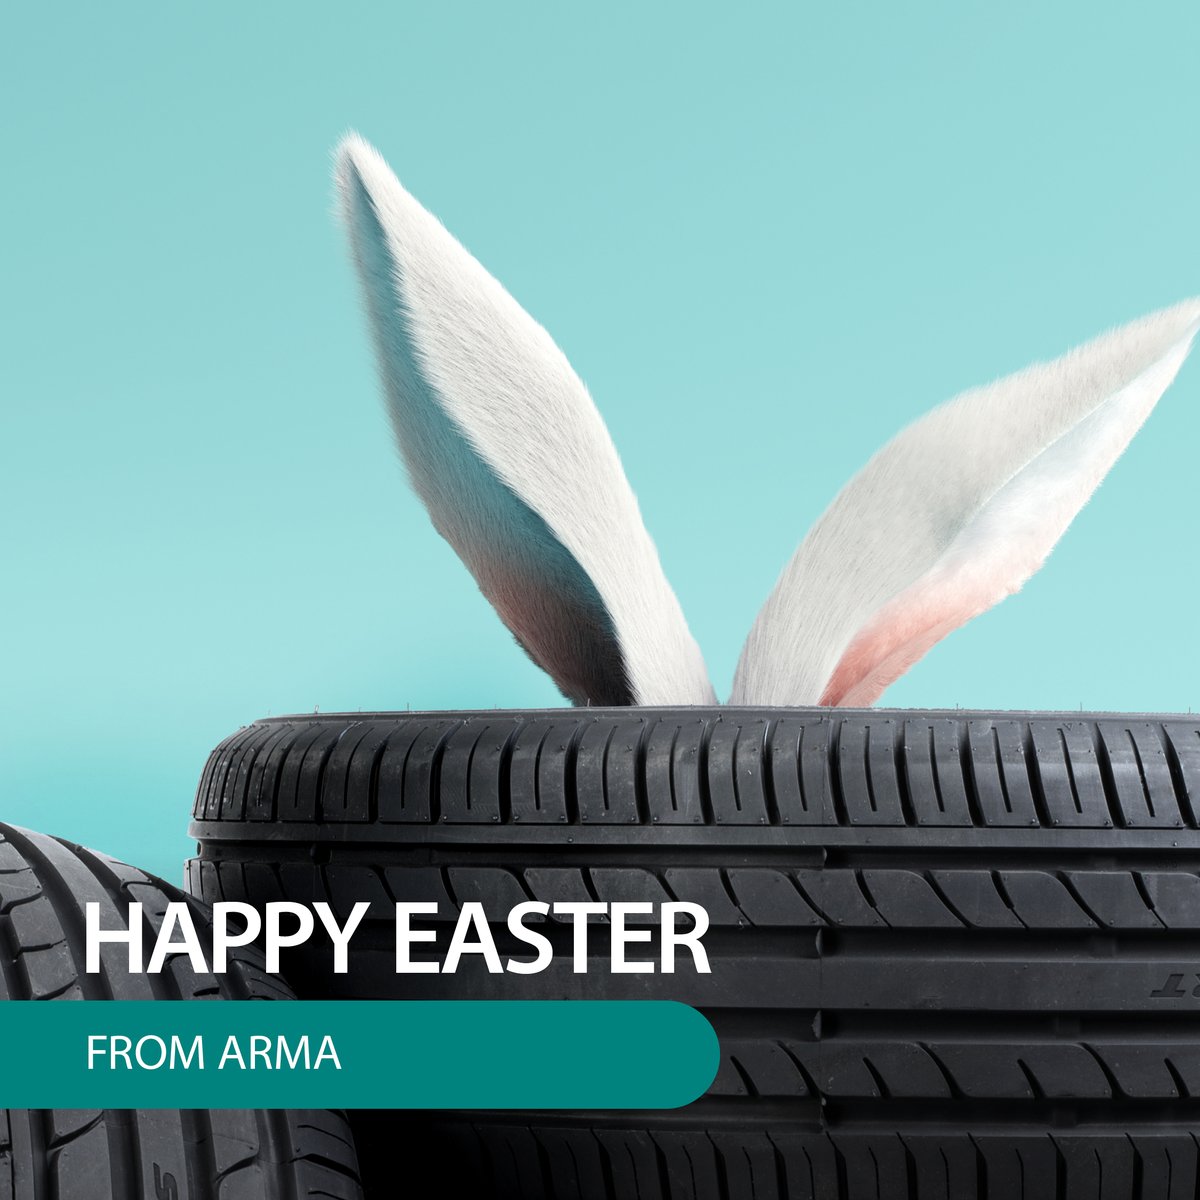 Happy Easter! Our office will be closed today and Monday so our team can enjoy an extra long weekend. We will reopen on Tuesday to assist you with your #recycling needs. #HappyEaster #Alberta